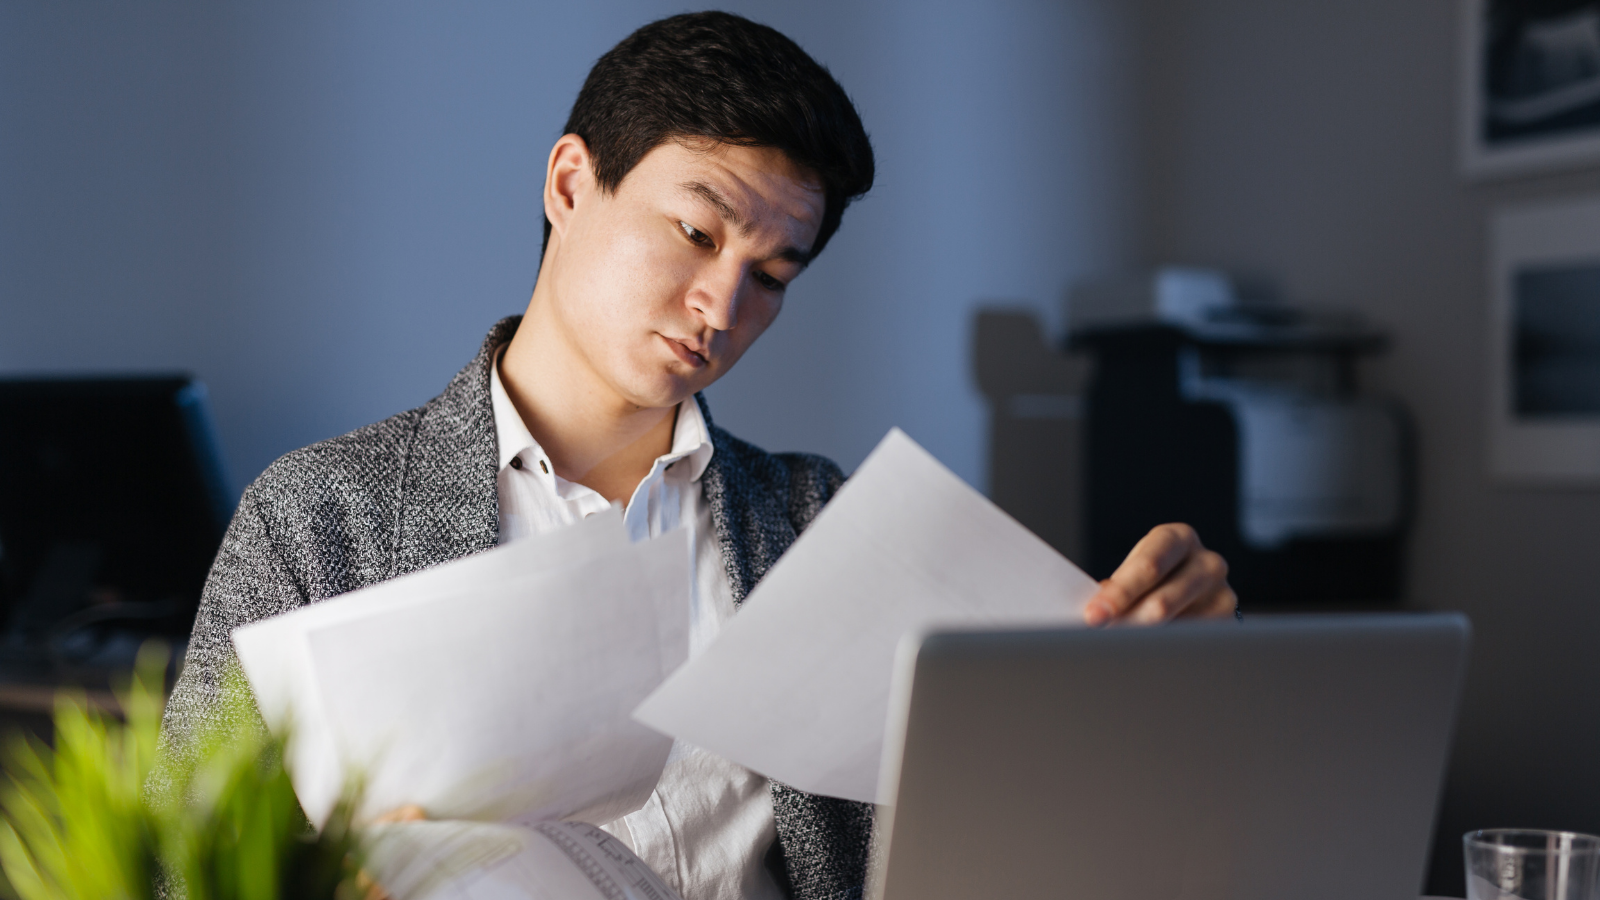 Man sitting at desk and looking at papers